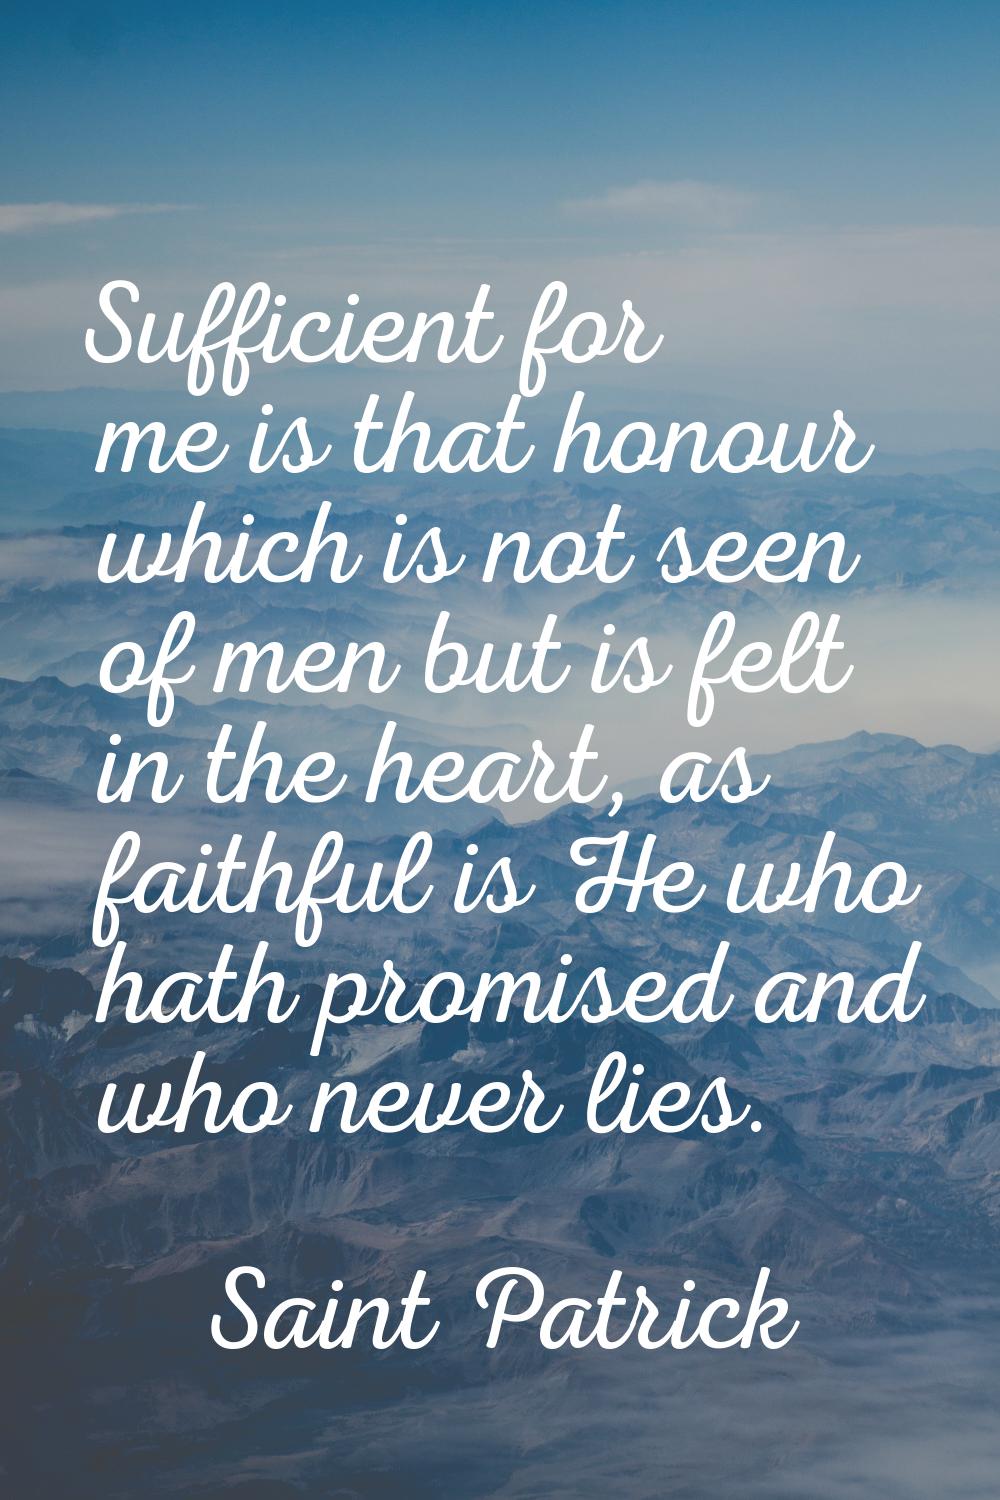 Sufficient for me is that honour which is not seen of men but is felt in the heart, as faithful is 